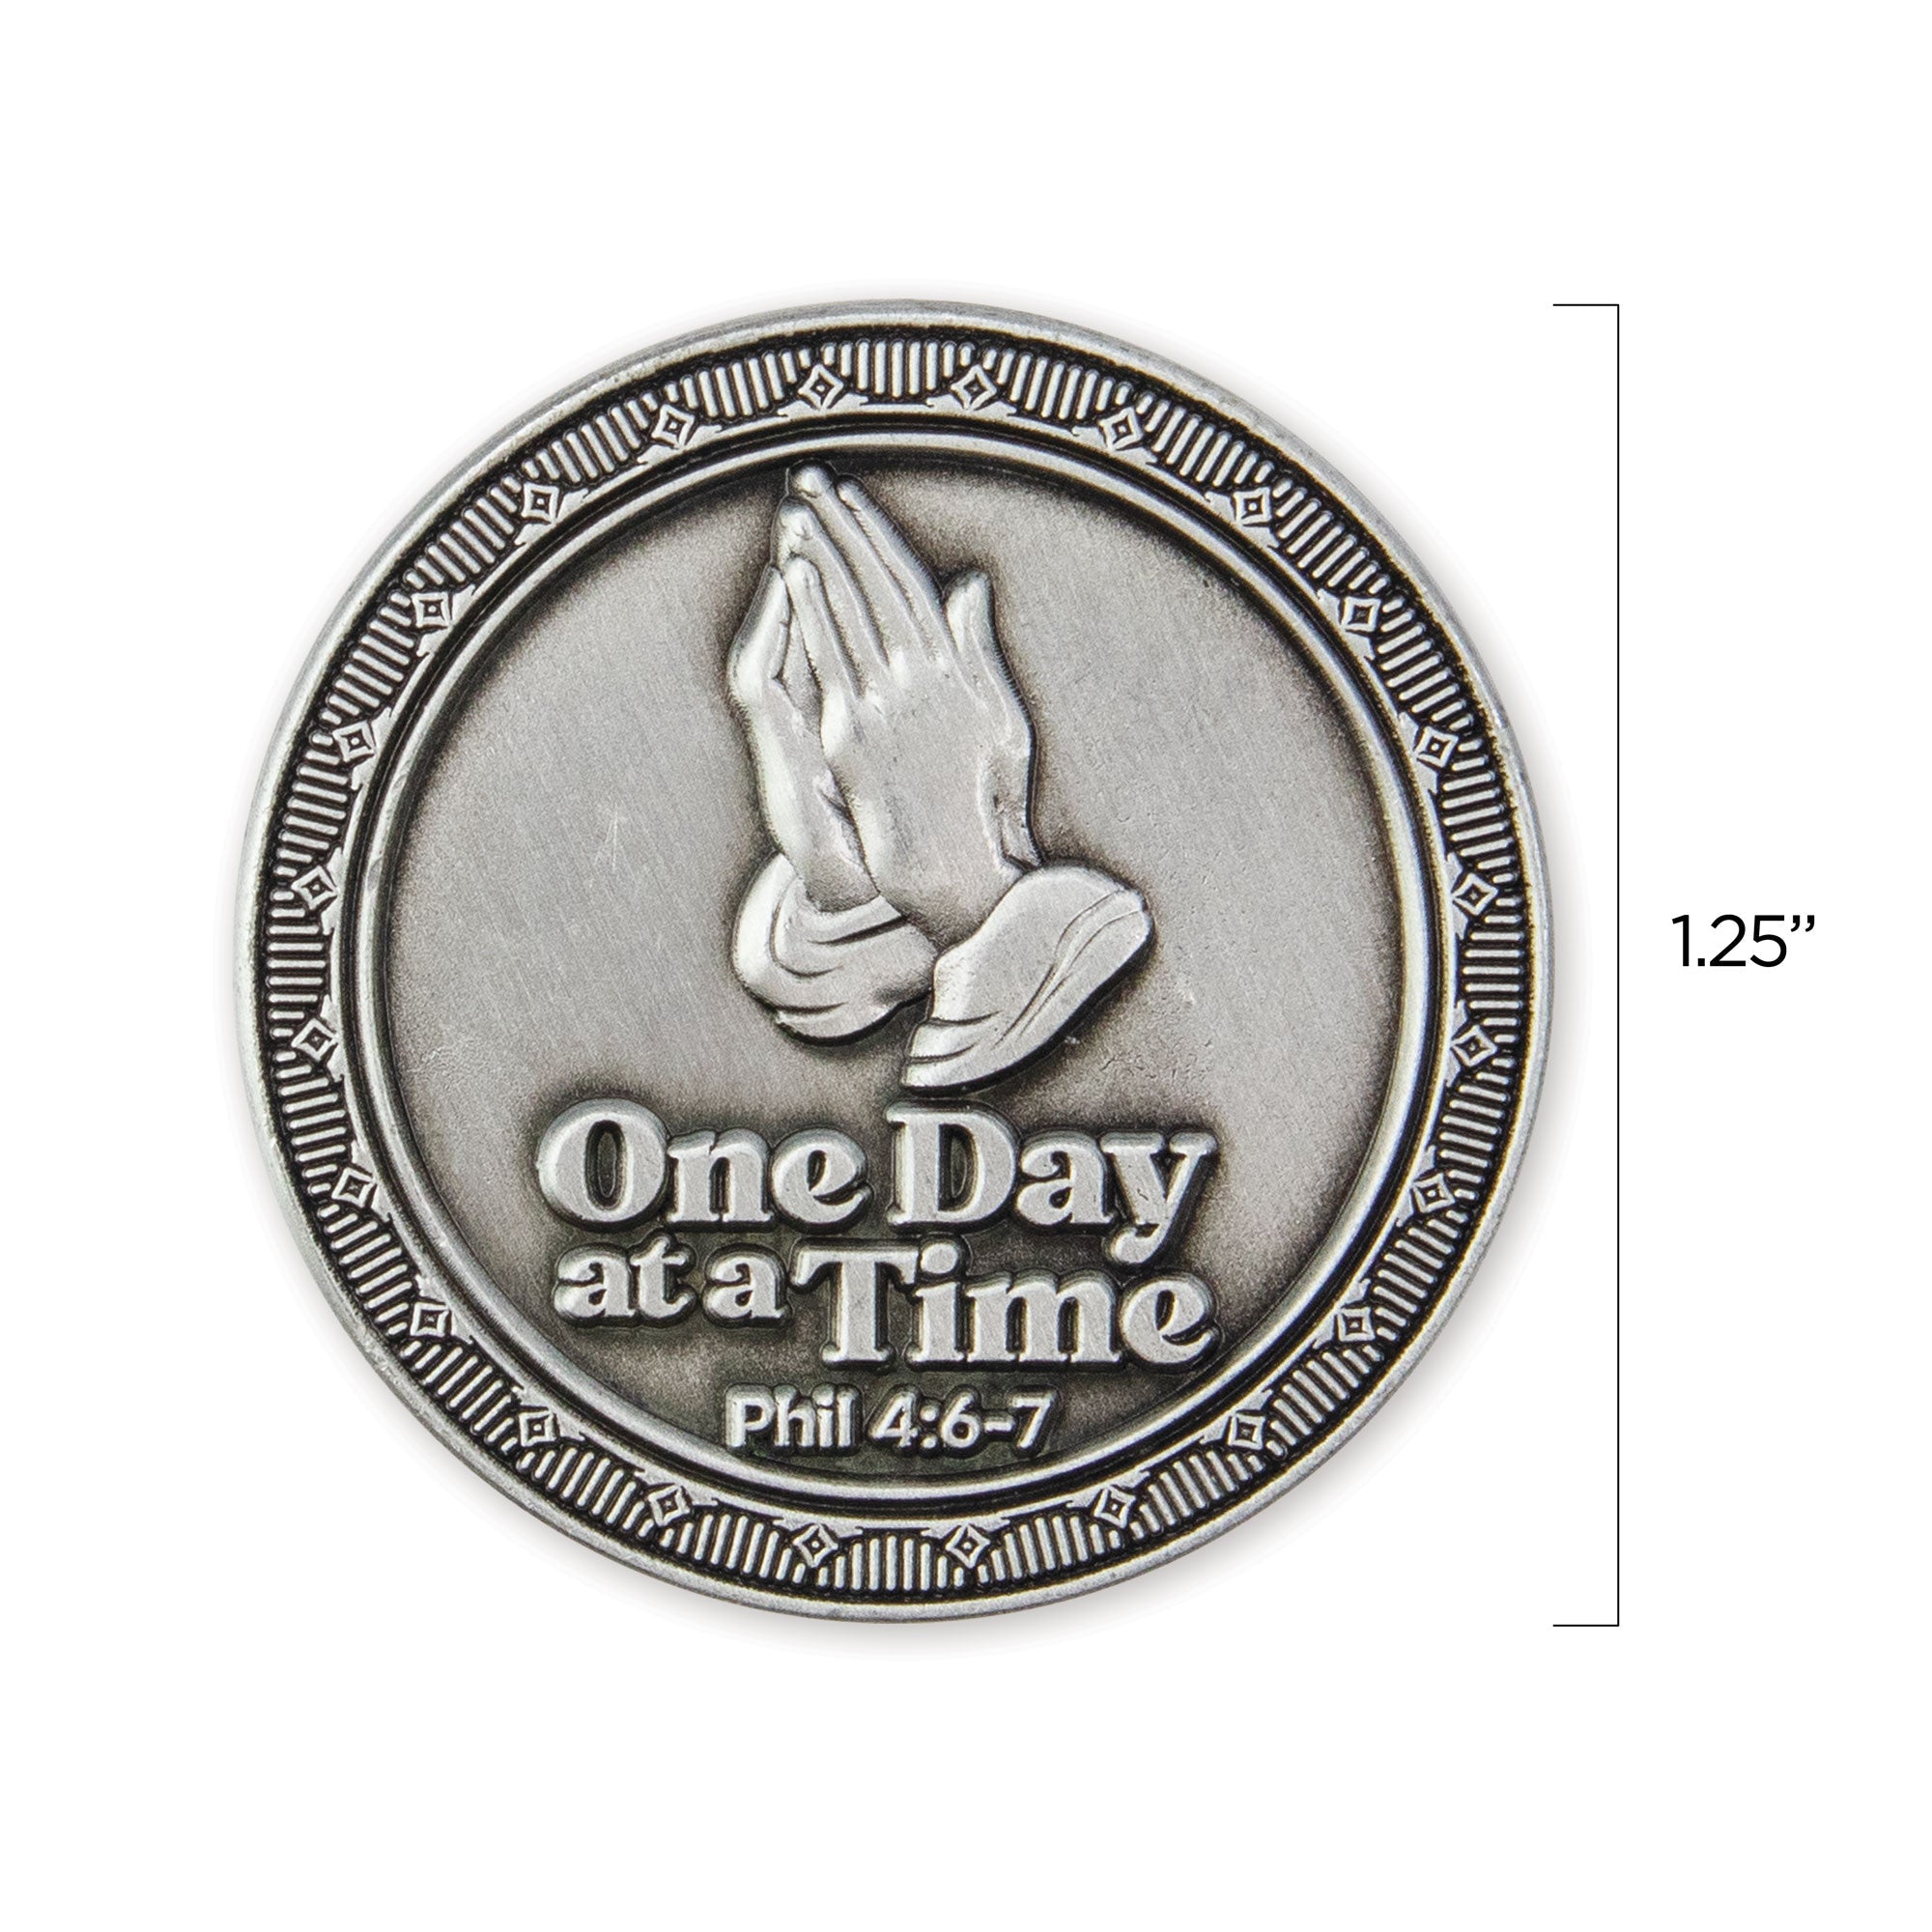 Serenity Prayer & One Day at a Time Love Expression Coin